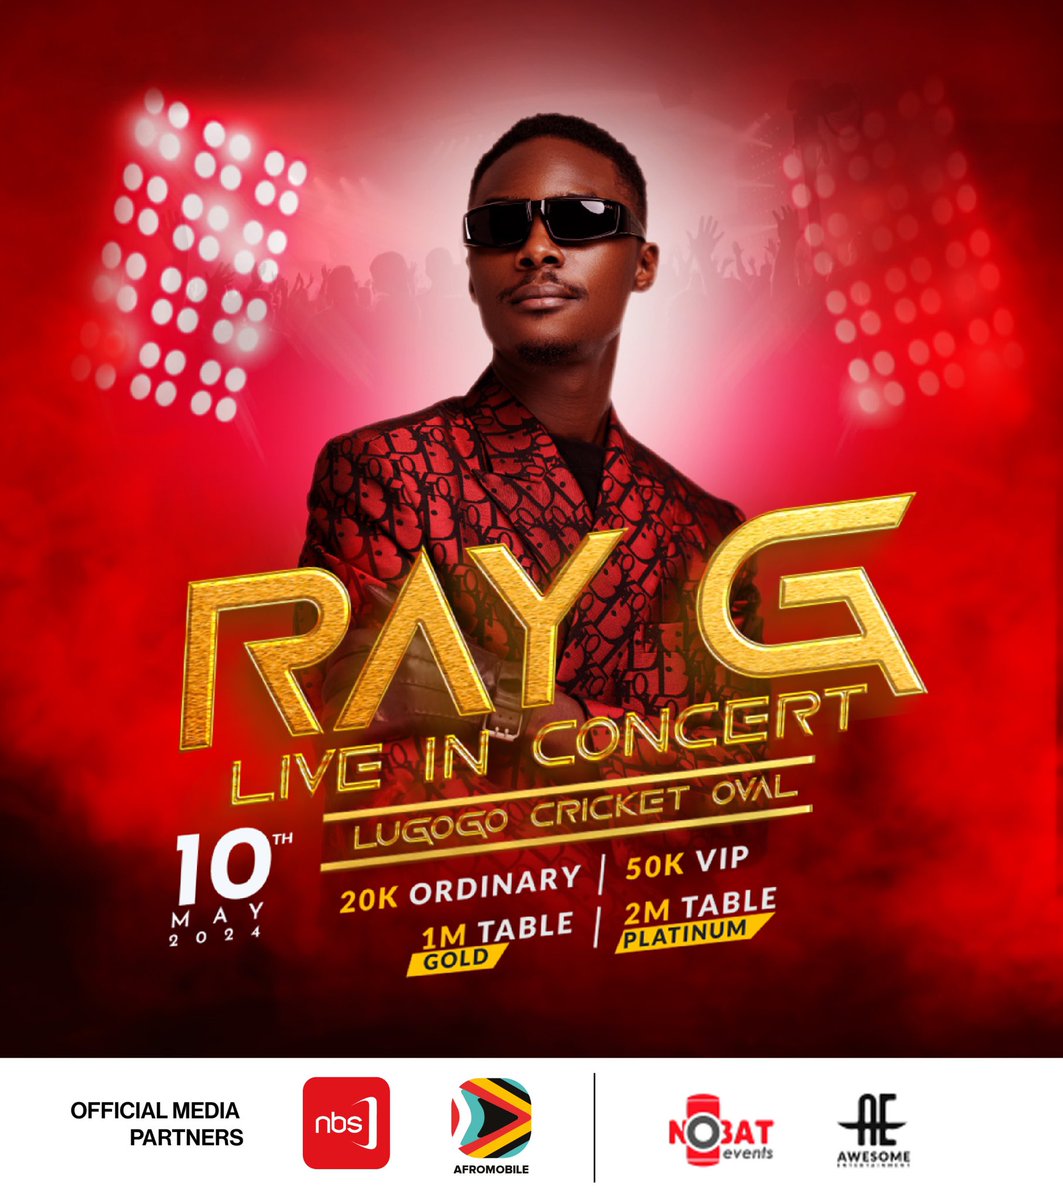 Get ready to dance the night away! #RayGLiveInConcert rocks Lugogo Cricket Oval on May 10th, 2024. Grab your tickets and let's make memories together! #NBSUpdates